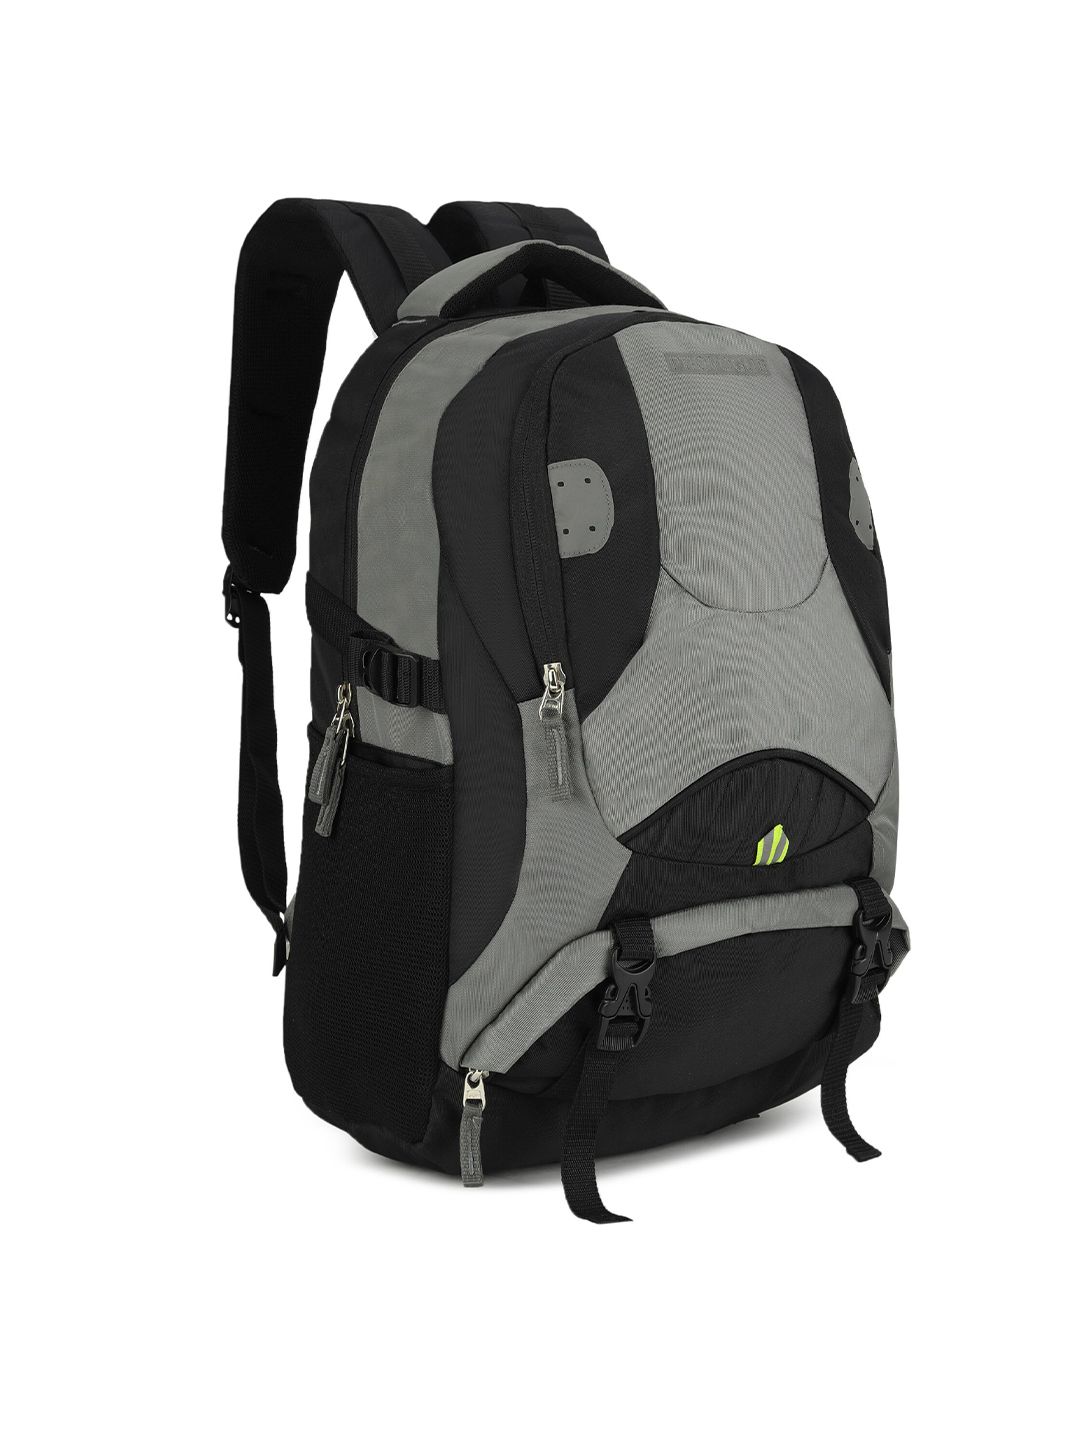 Provogue Unisex Grey & Black Colourblocked with Reflective Strip Laptop cum Backpack Price in India